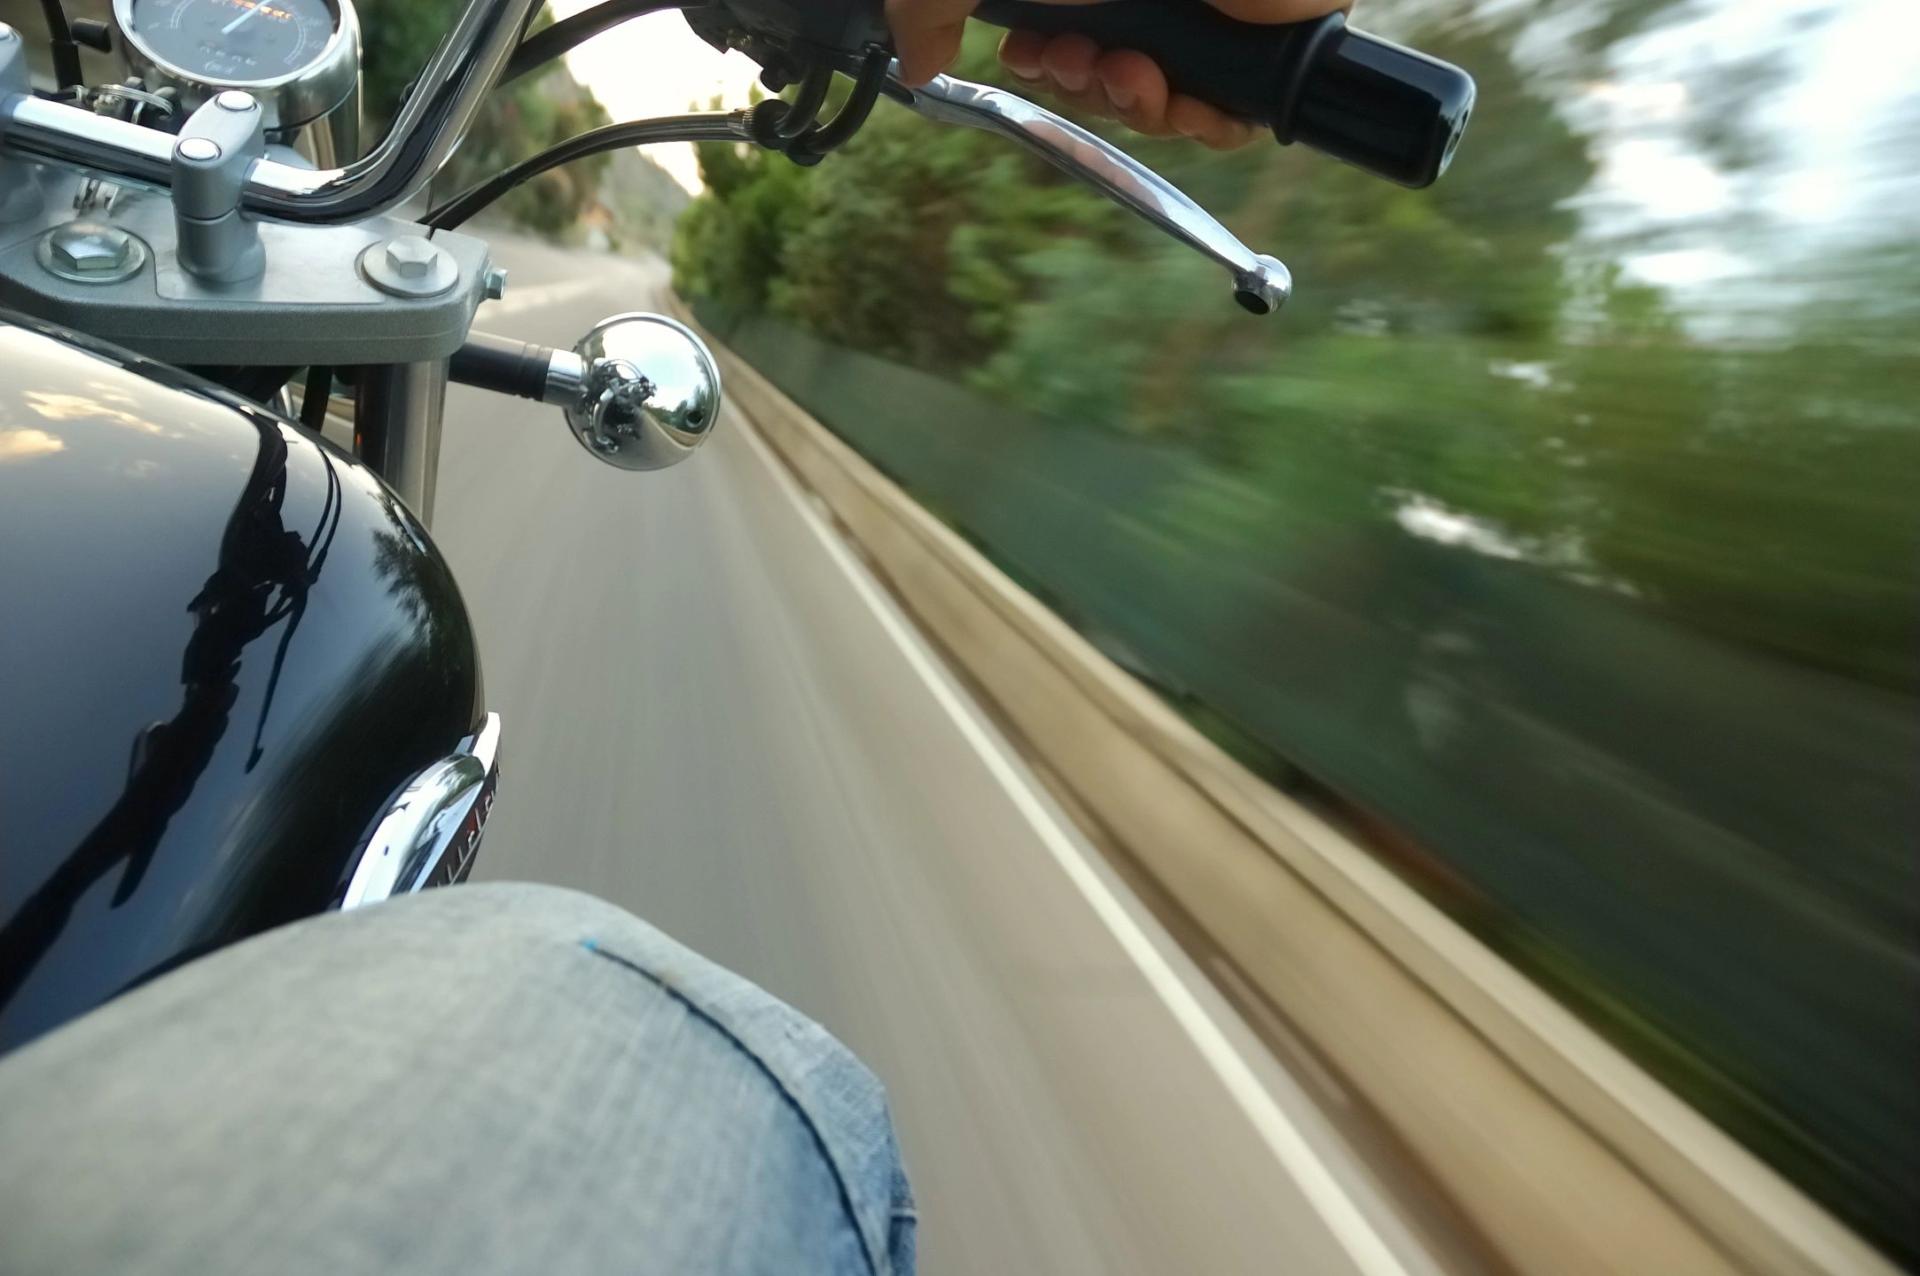 Motorcycle accidents are more common than you think